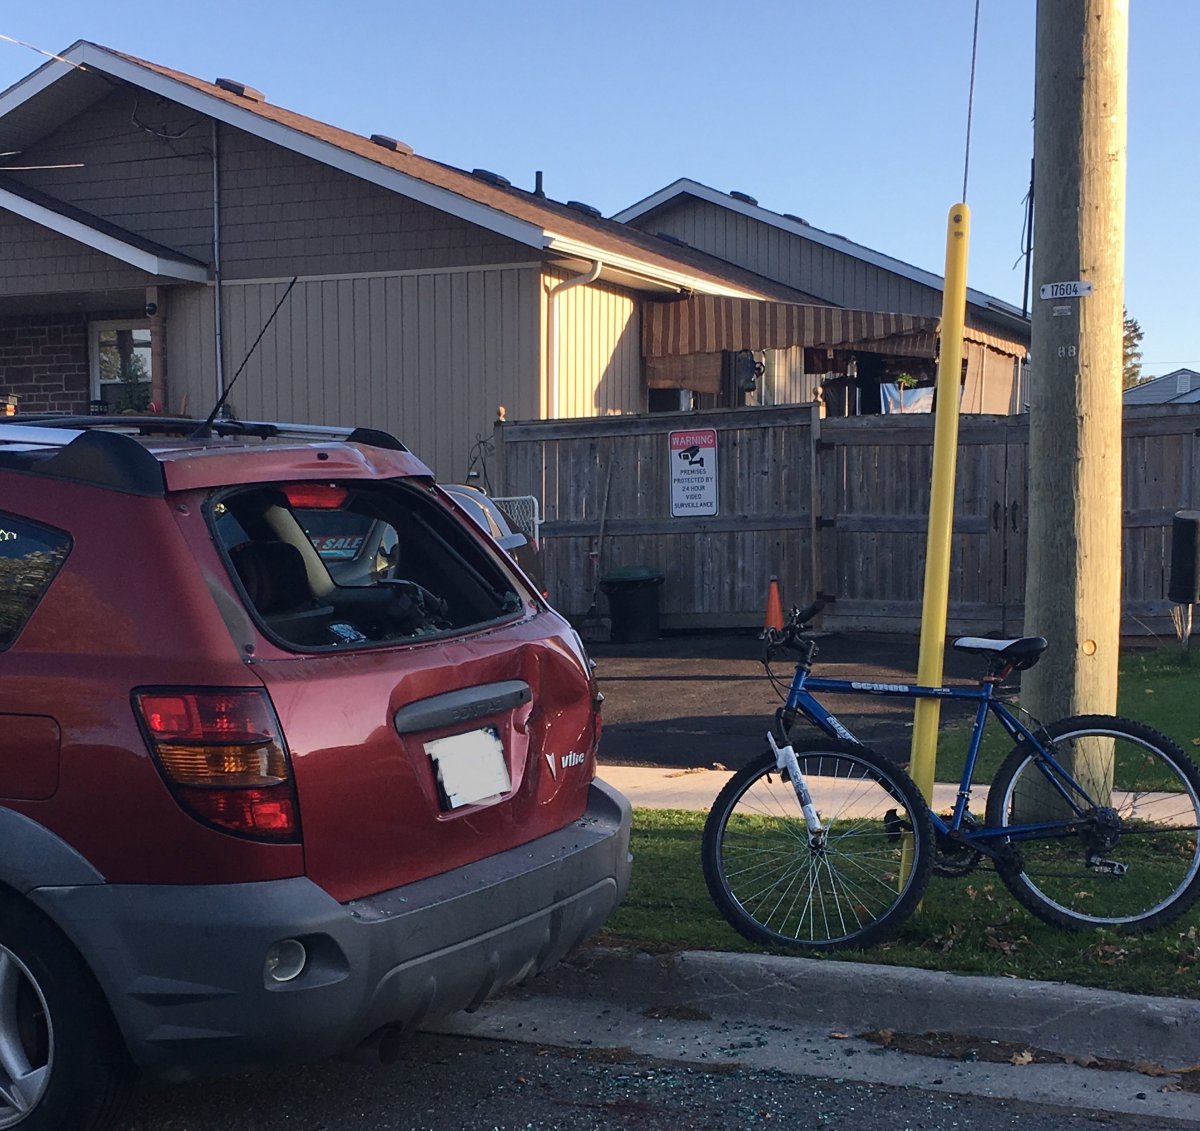 A young man riding a bicycle was sent to Kingston General Hospital after police say he struck a parked vehicle.